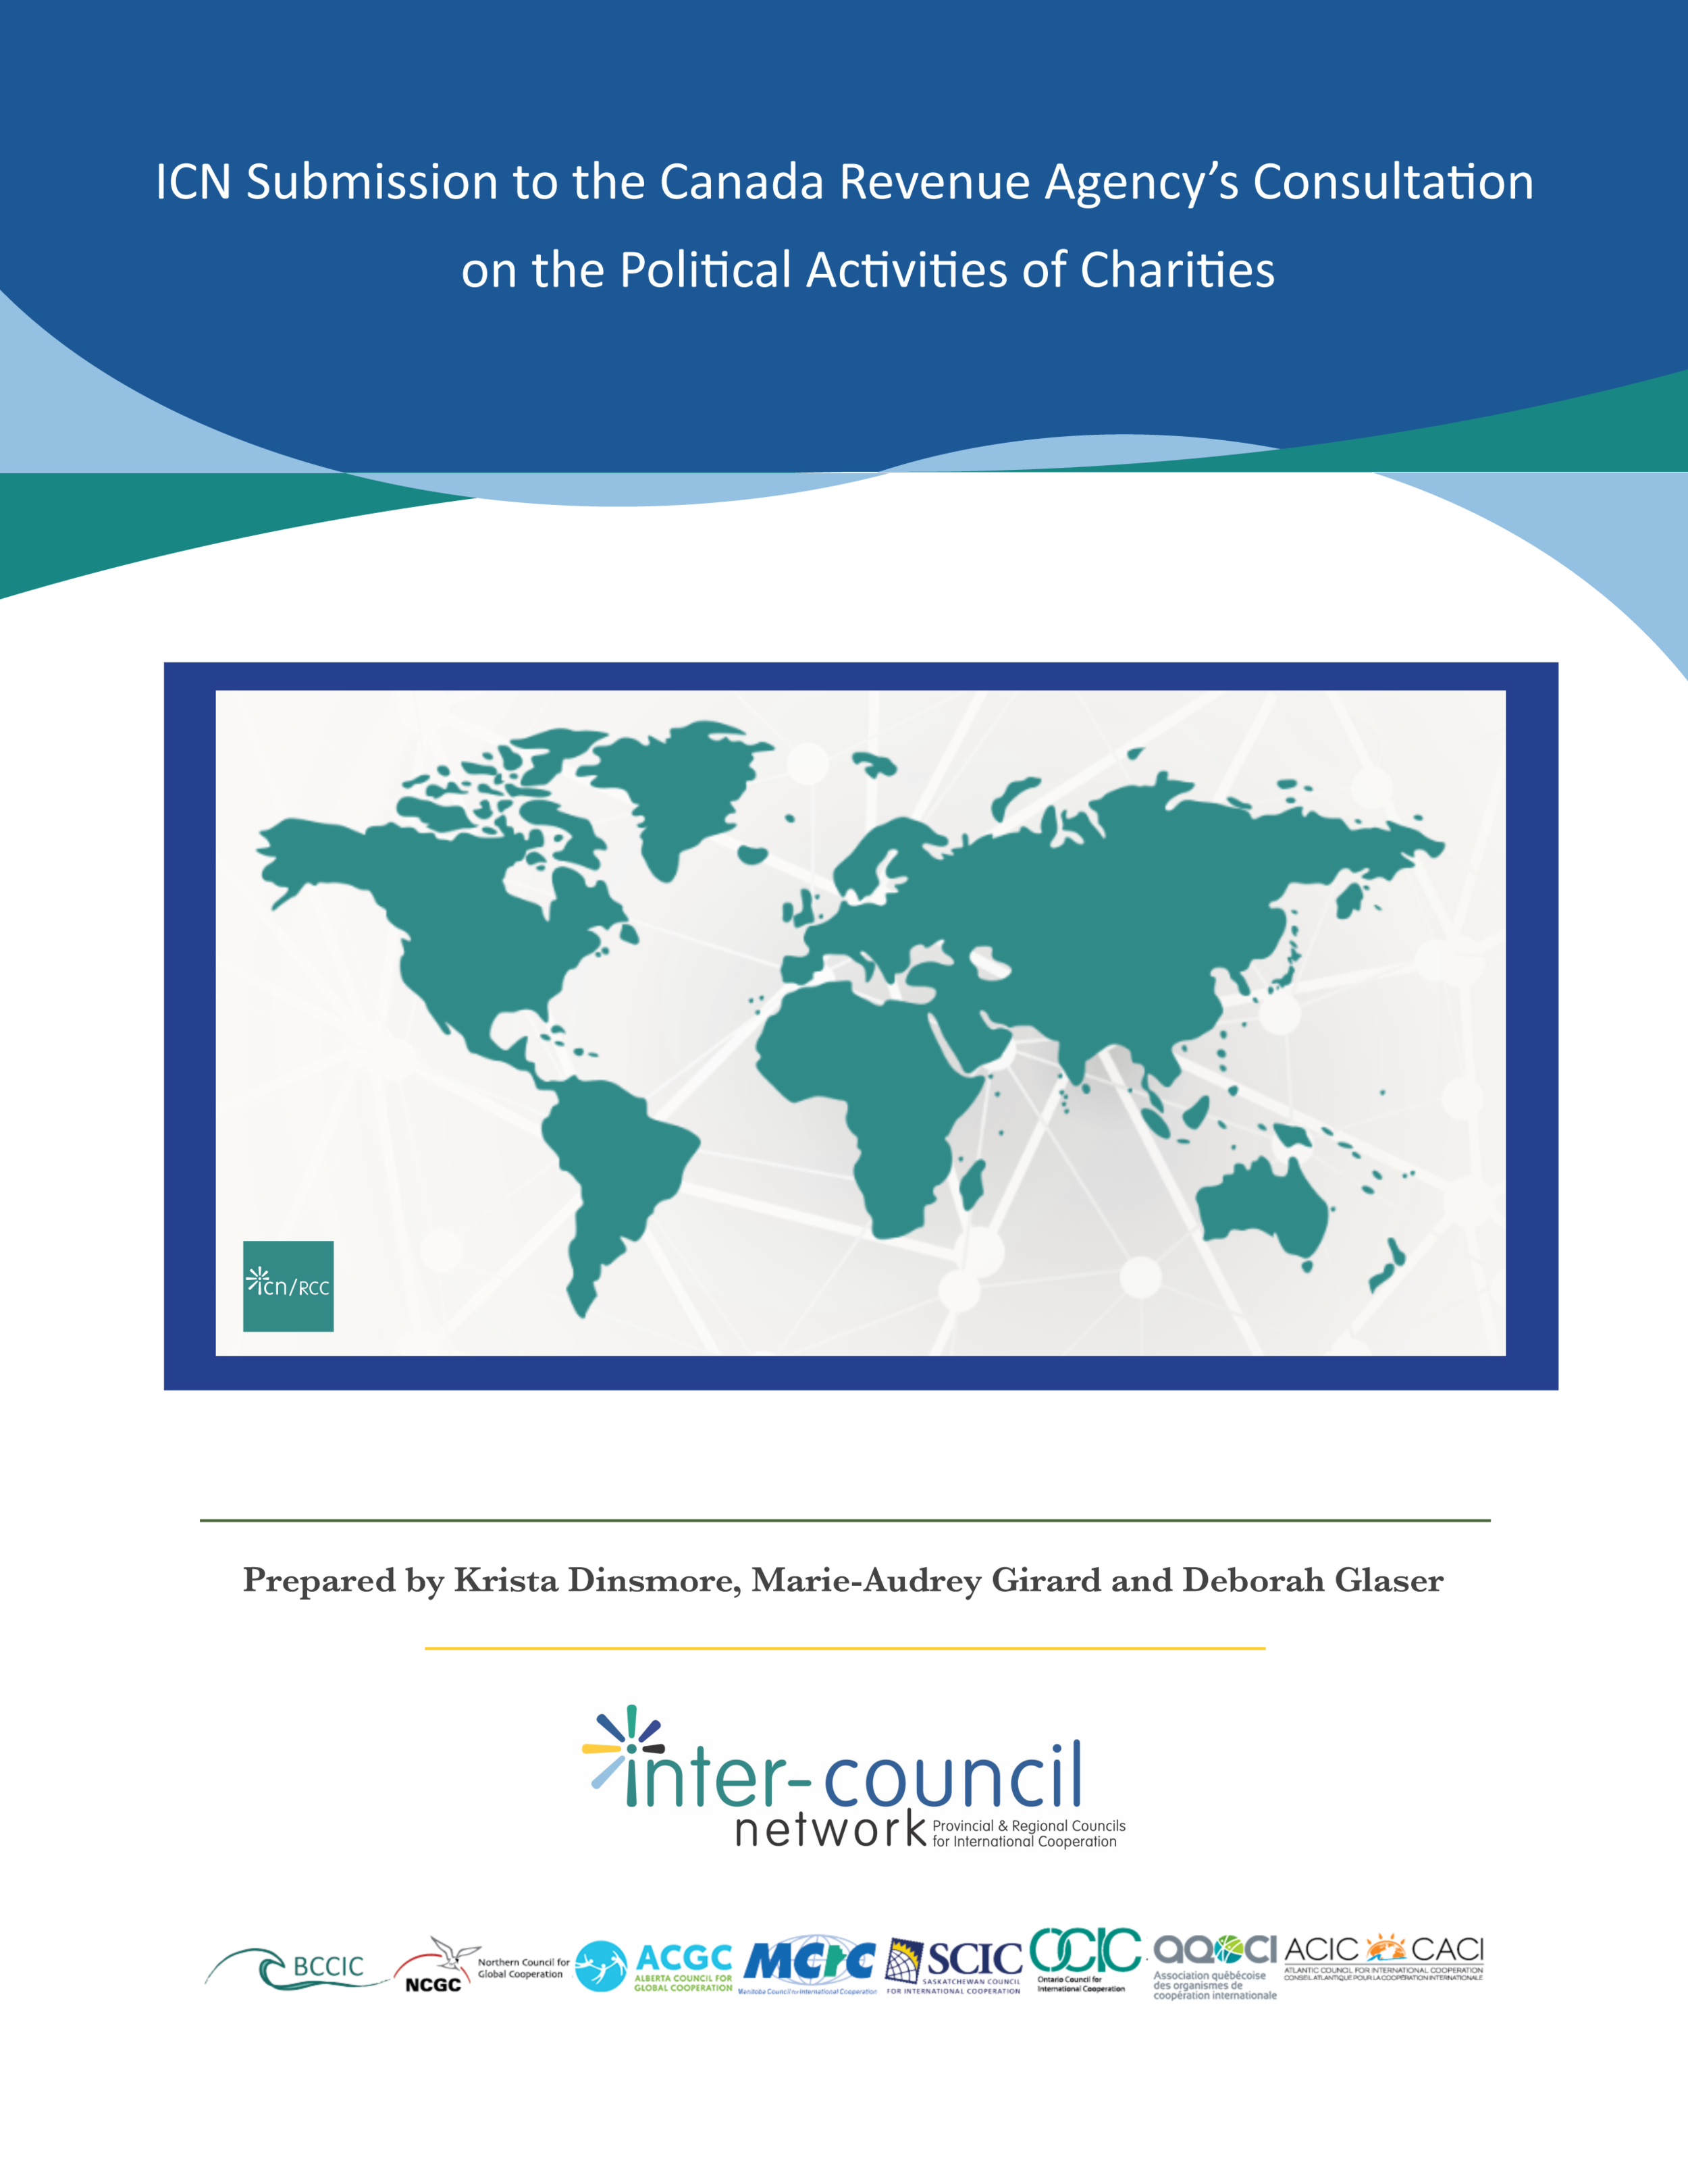 ICN Submission to the Canada Revenue Agency’s Consultation on the Political Activities of Charities